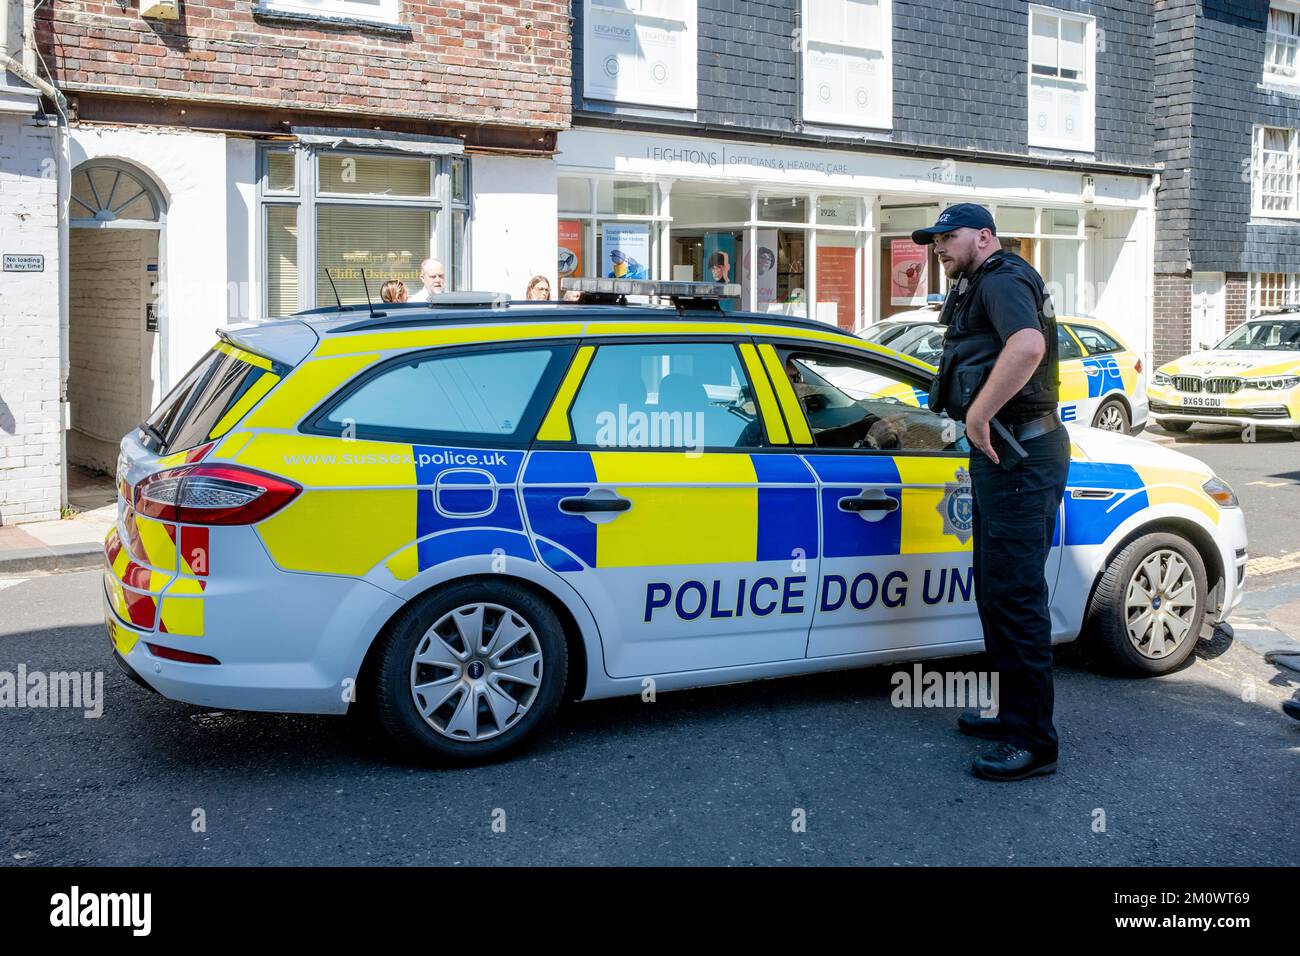 A Police Dog Unit Car Arrives At An Incident Off The High Street , Lewes, East Sussex, UK. Stock Photo